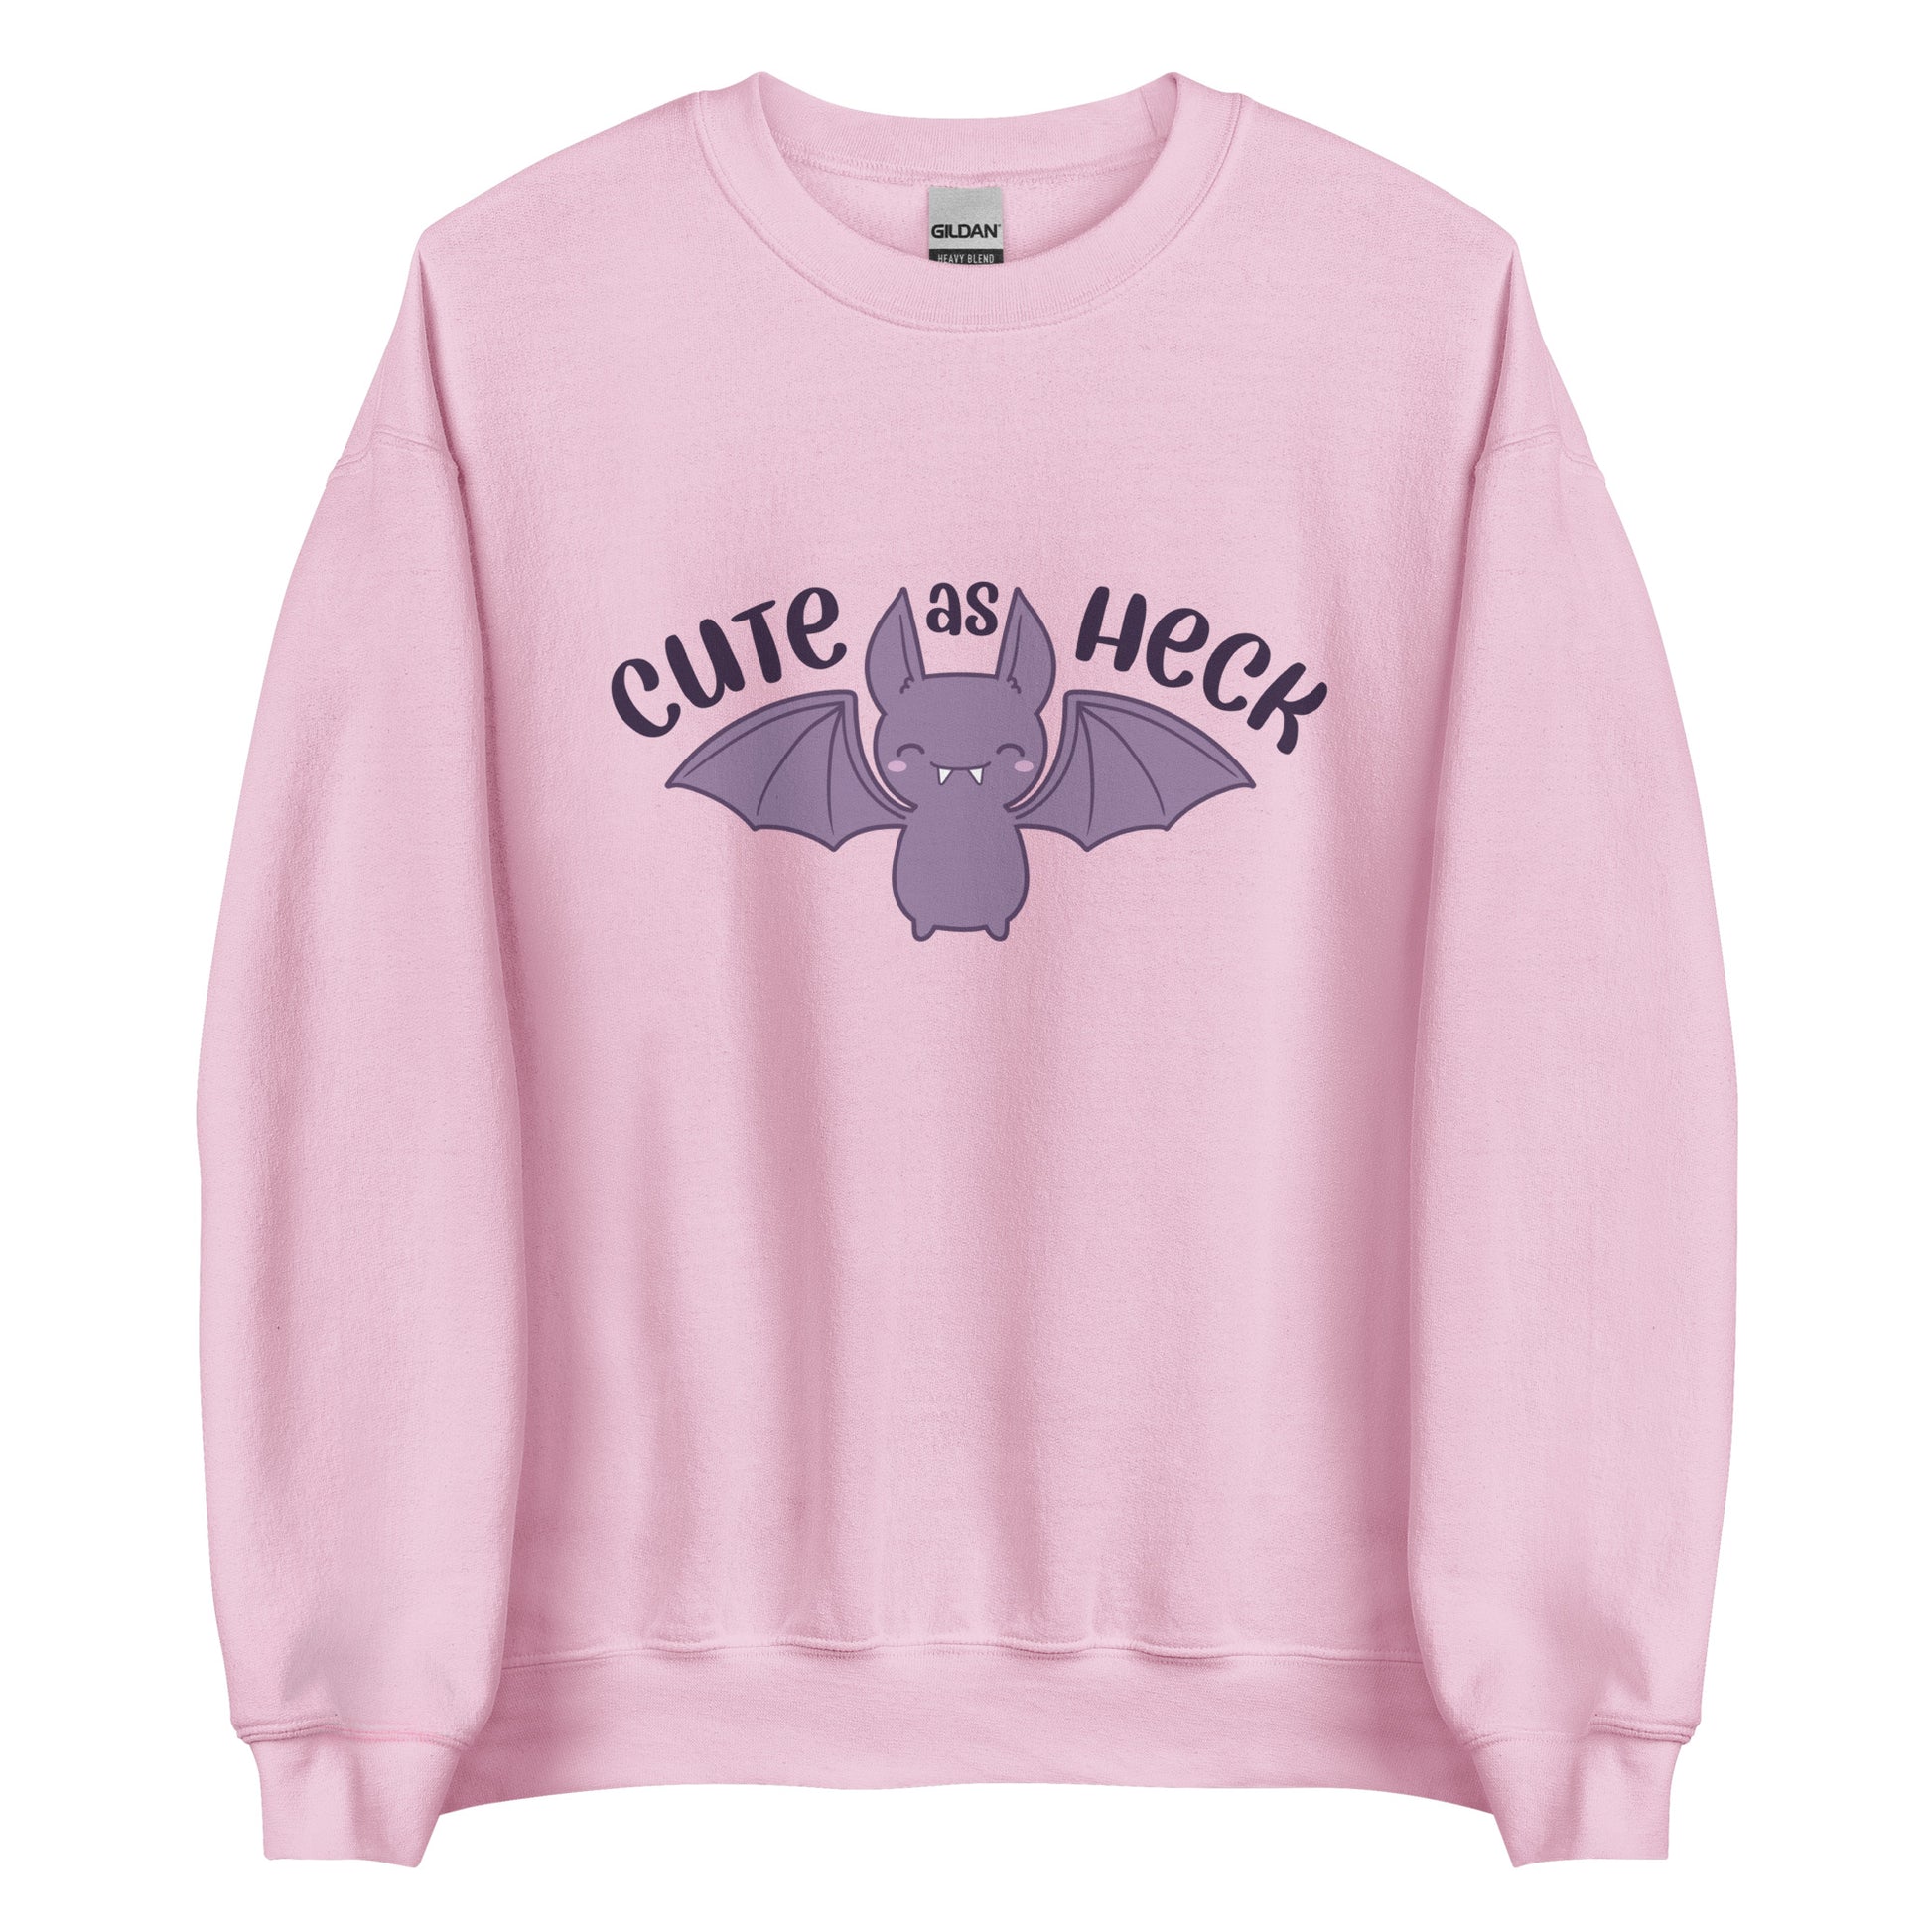 A pink crewneck sweatshirt featuring a smiling purple bat and text reading "Cute As Heck"